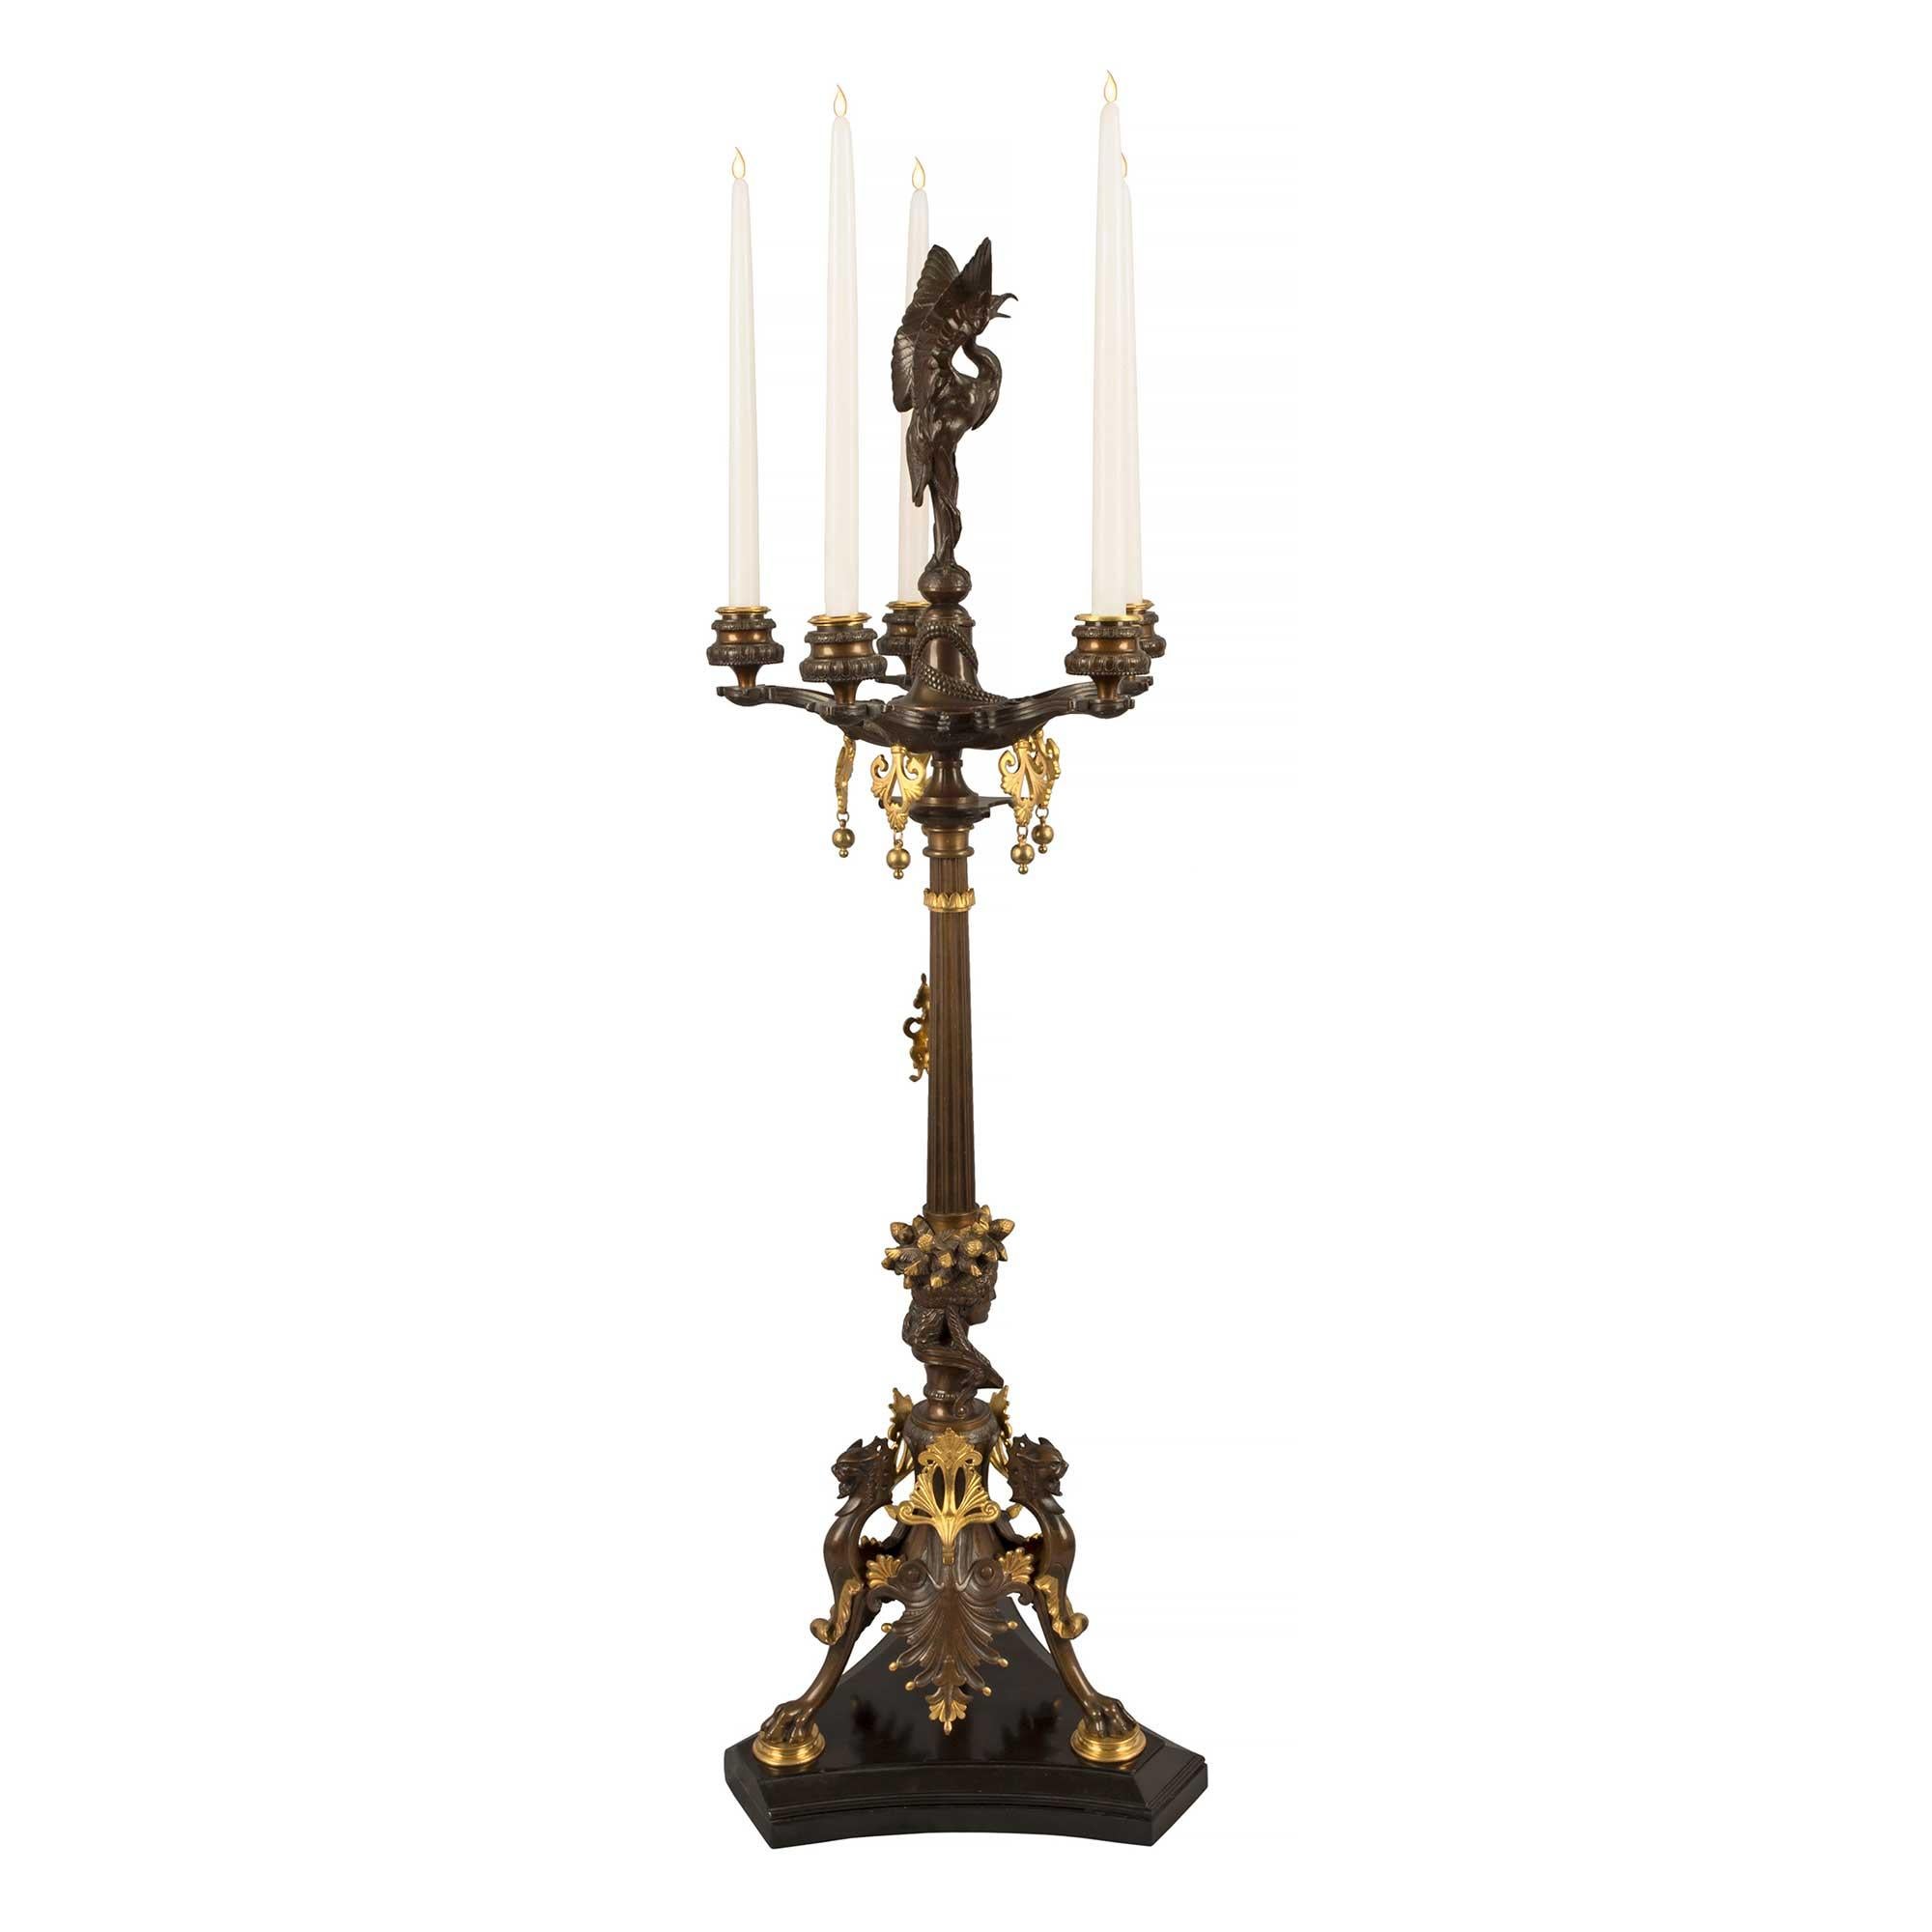 French 19th Century Renaissance Style Ormolu and Patinated Bronze Candelabras In Good Condition For Sale In West Palm Beach, FL